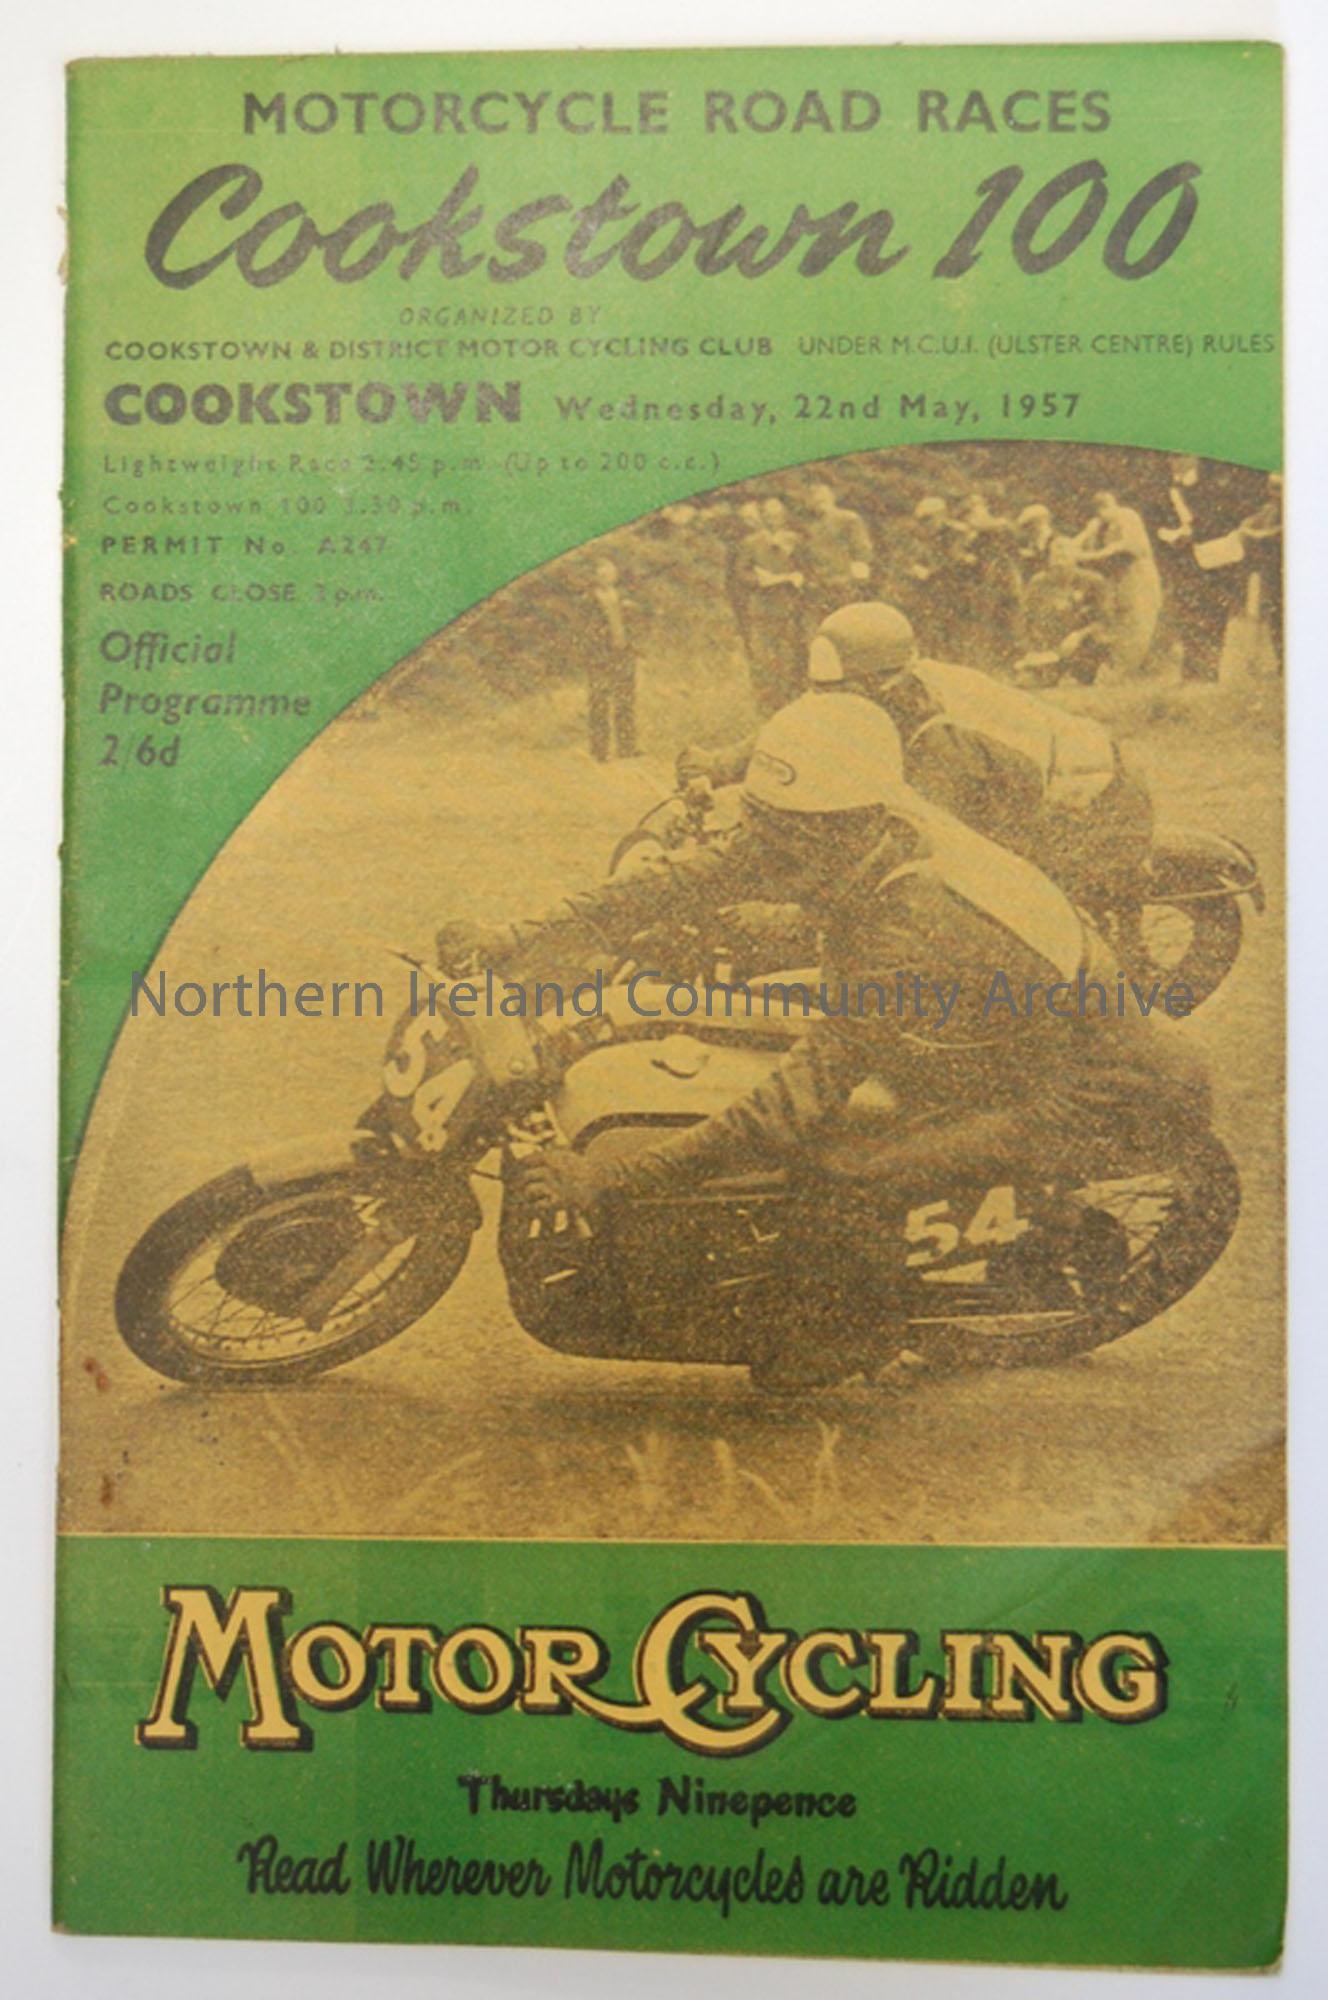 Official Programme of The Cookstown “100” Motorcycle Road Race to be held at Cookstown on Wednesday, 22nd May, 1957.